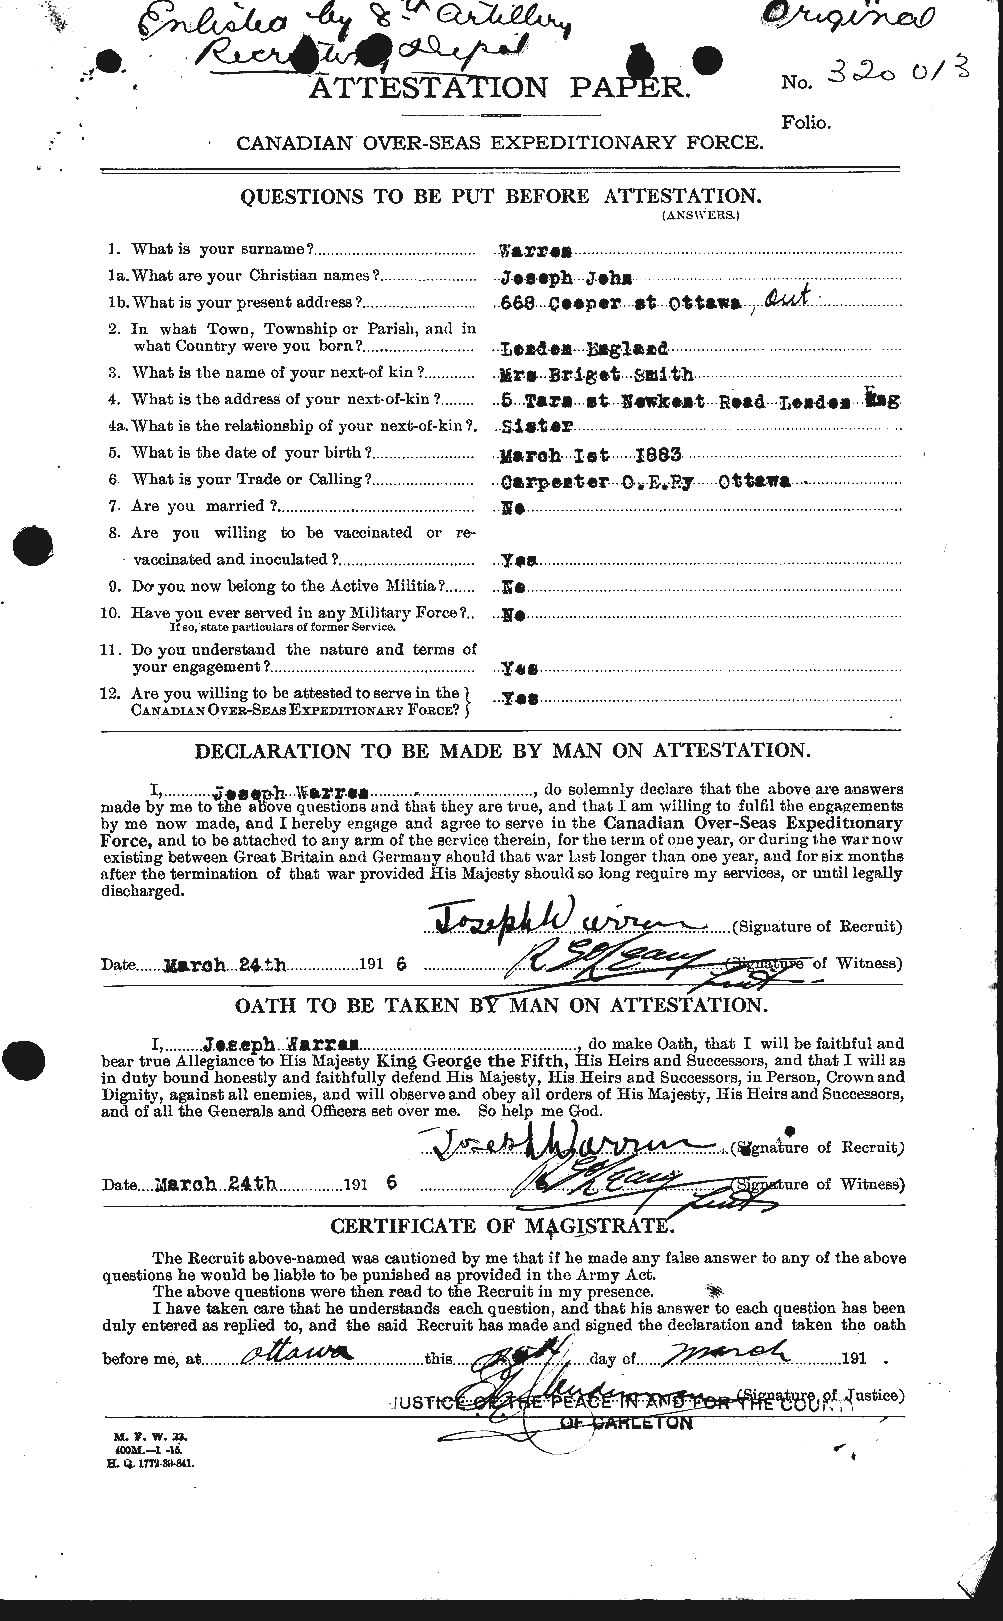 Personnel Records of the First World War - CEF 658572a